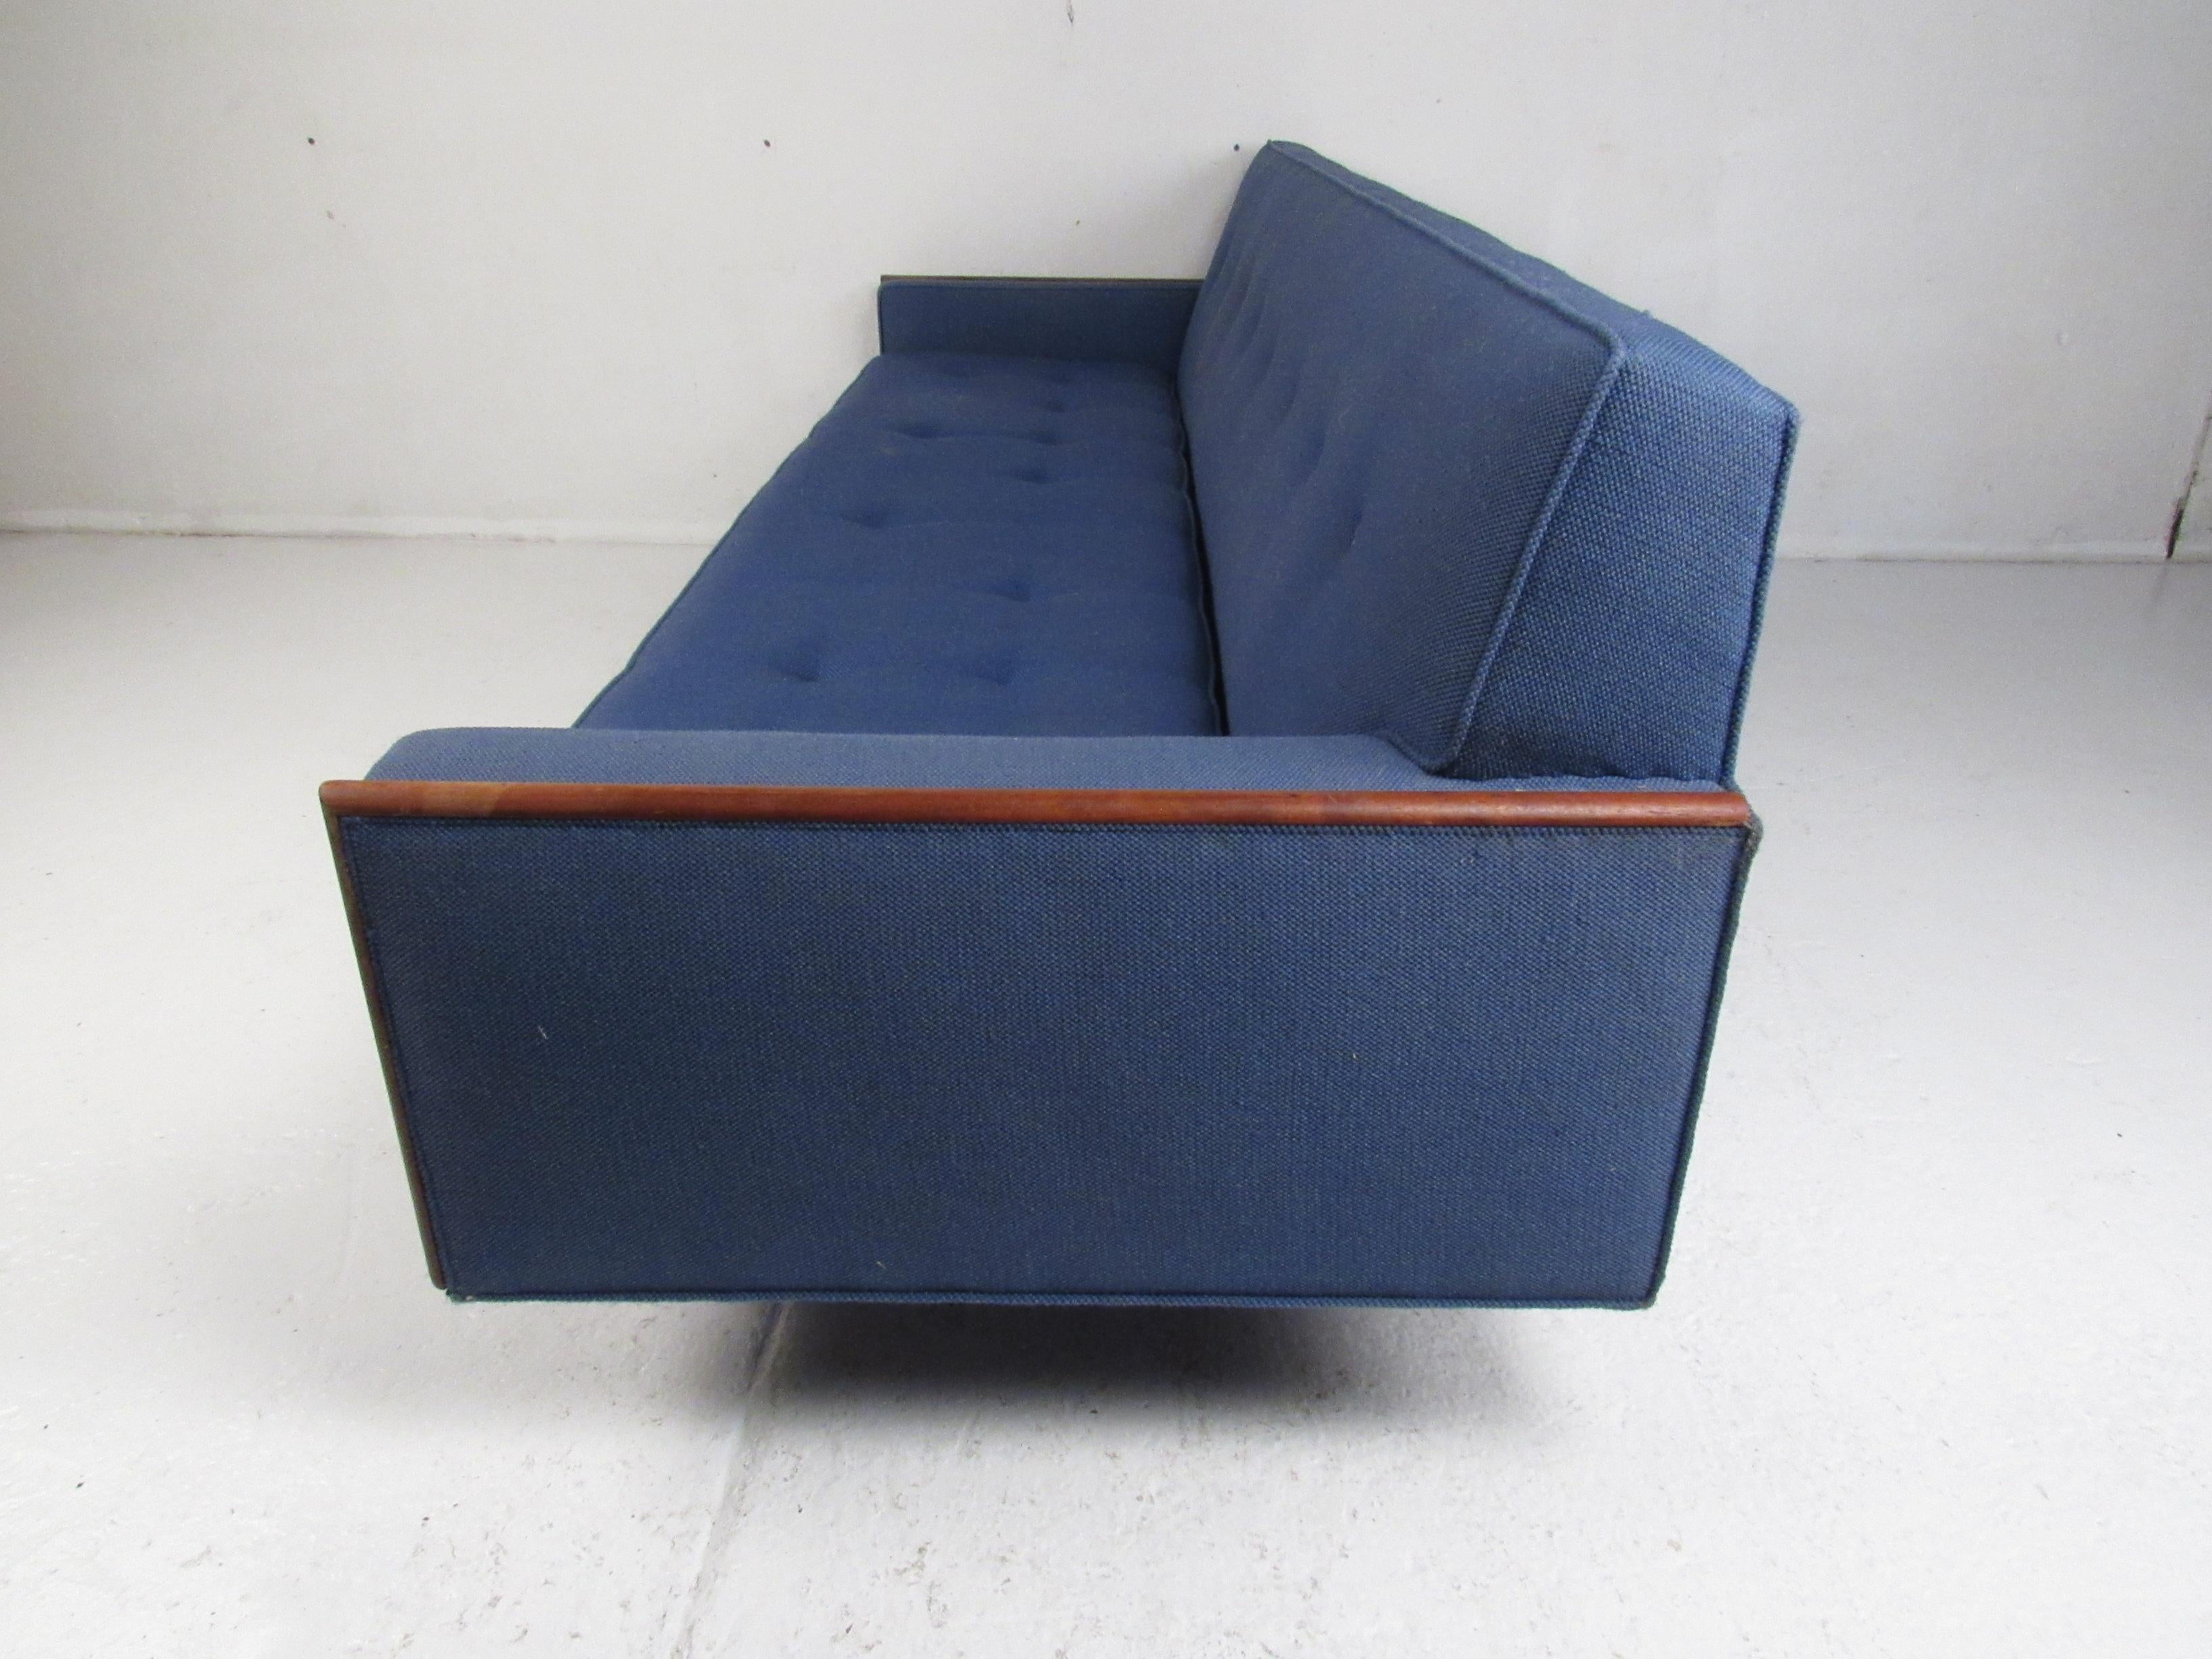 American Mid-Century Modern Sofa with Walnut Accents